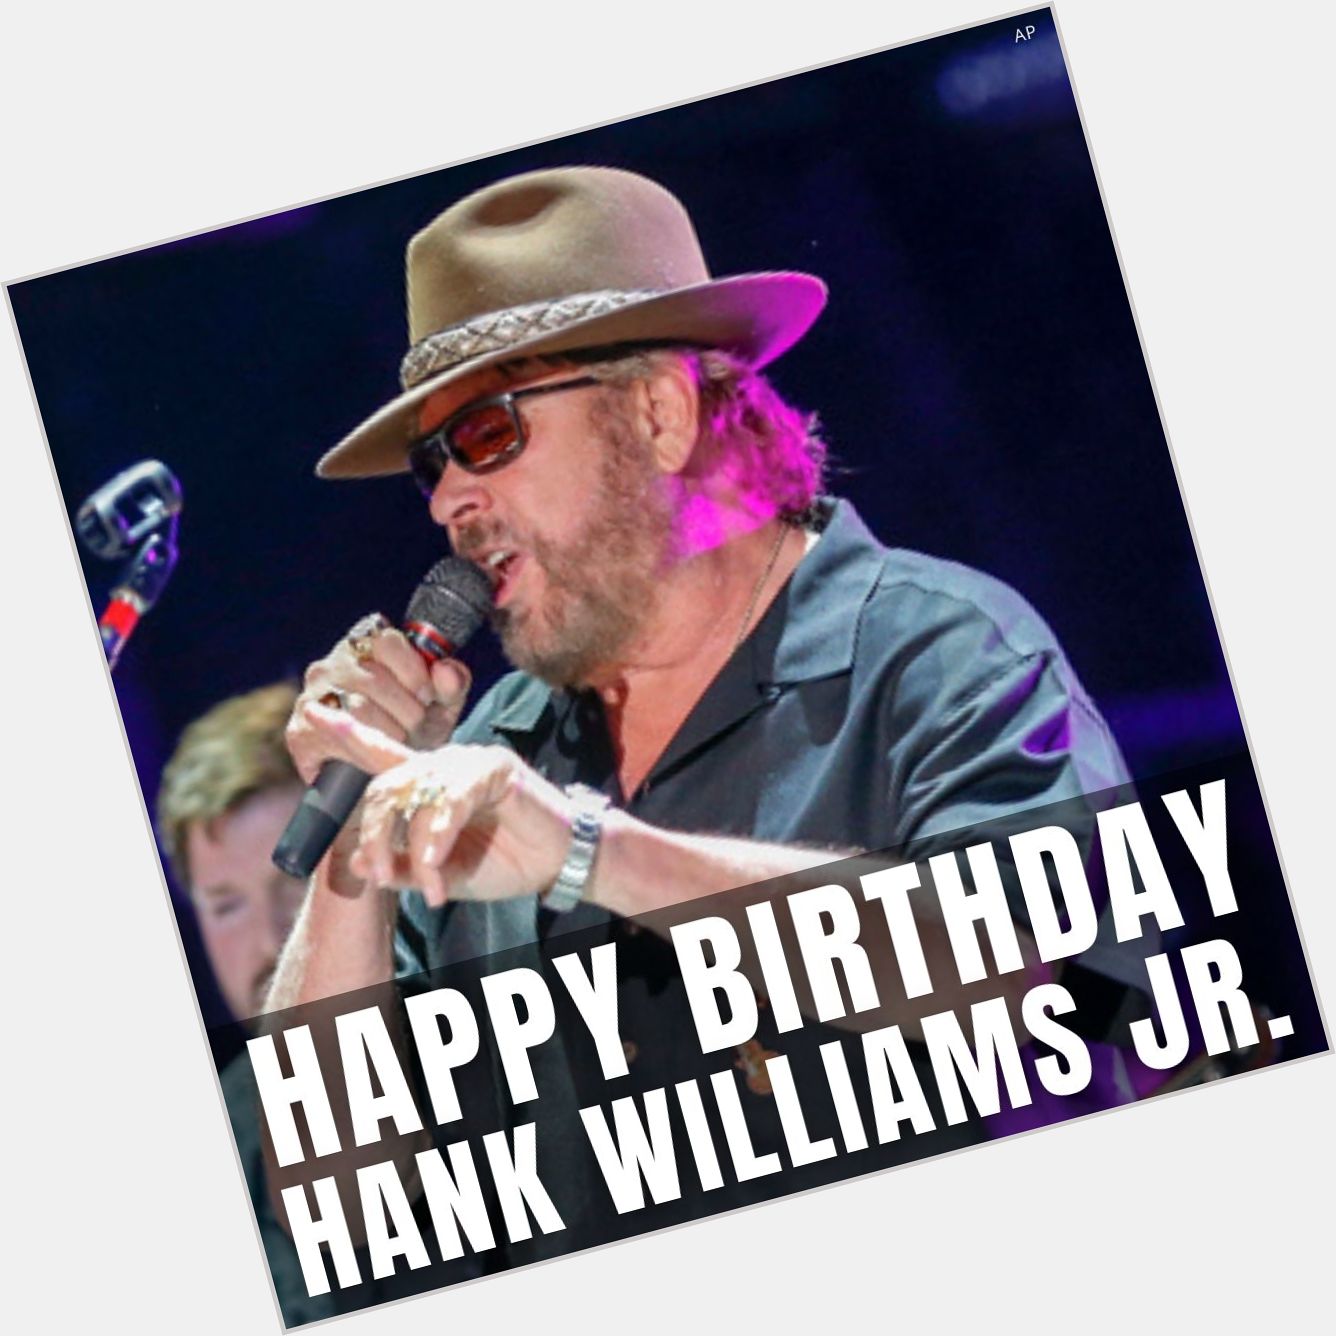 Join us in wishing Country Music Hall of Fame s Class of 2020 inductee Hank Williams Jr. a Happy Birthday!! 